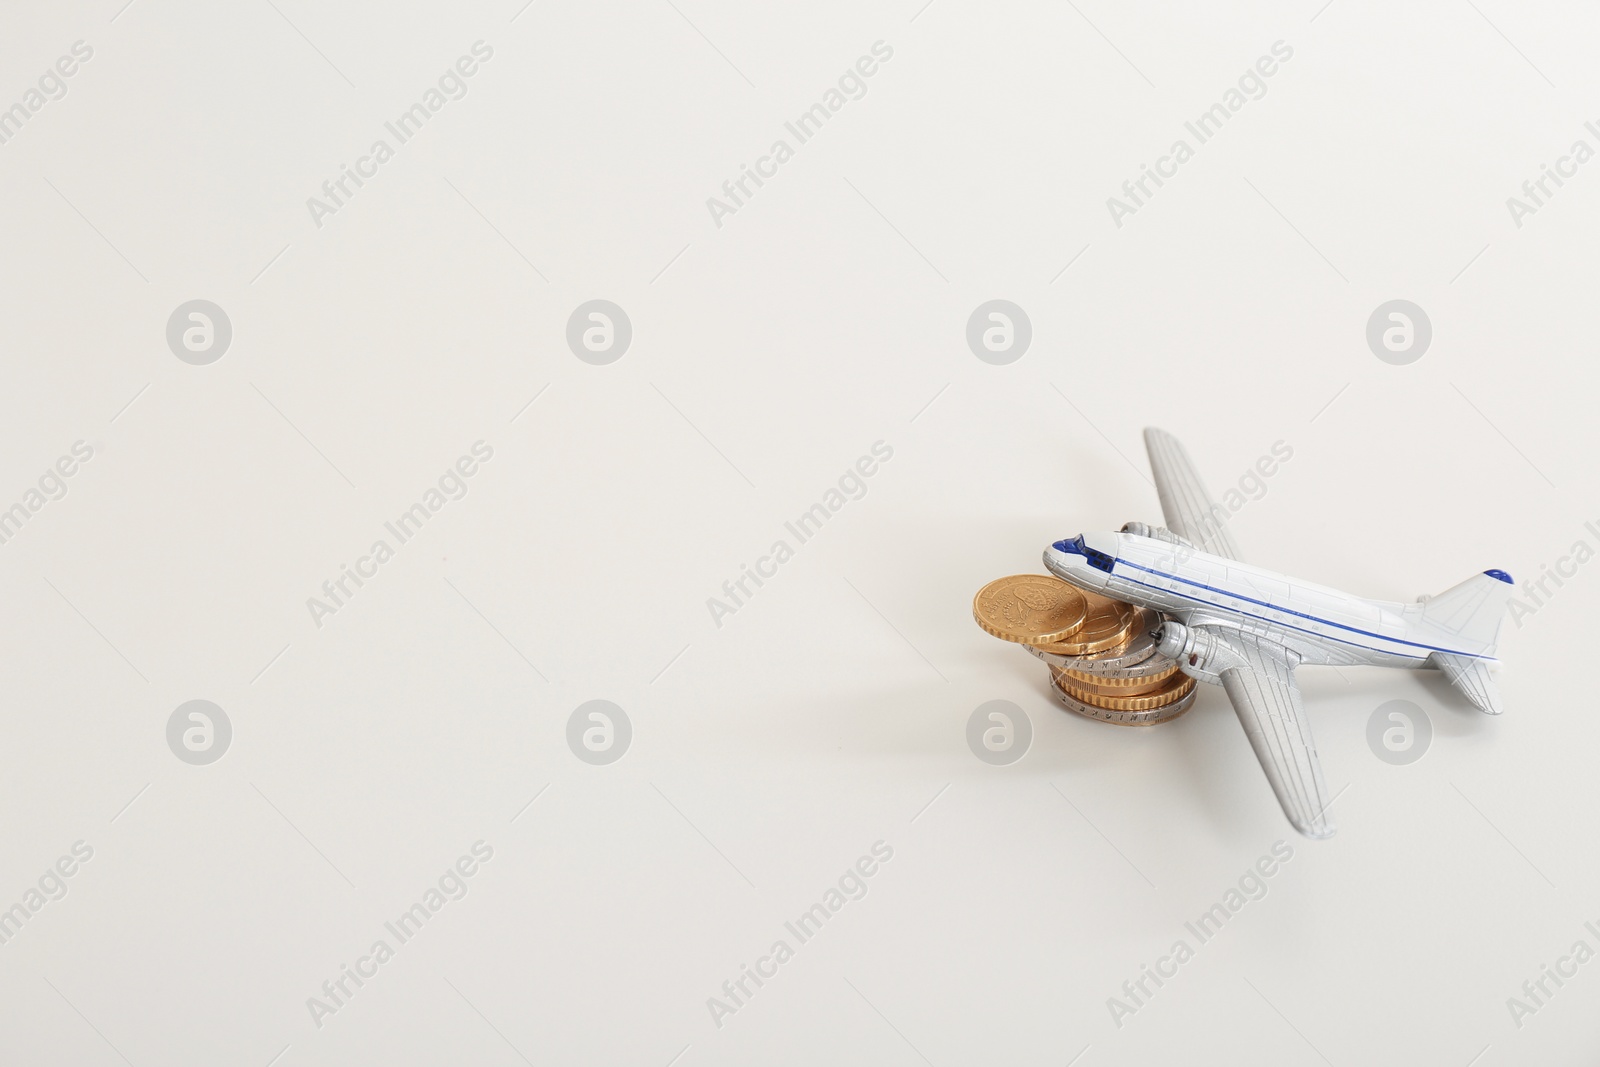 Photo of Toy plane, coins and space for text on white background. Travel insurance